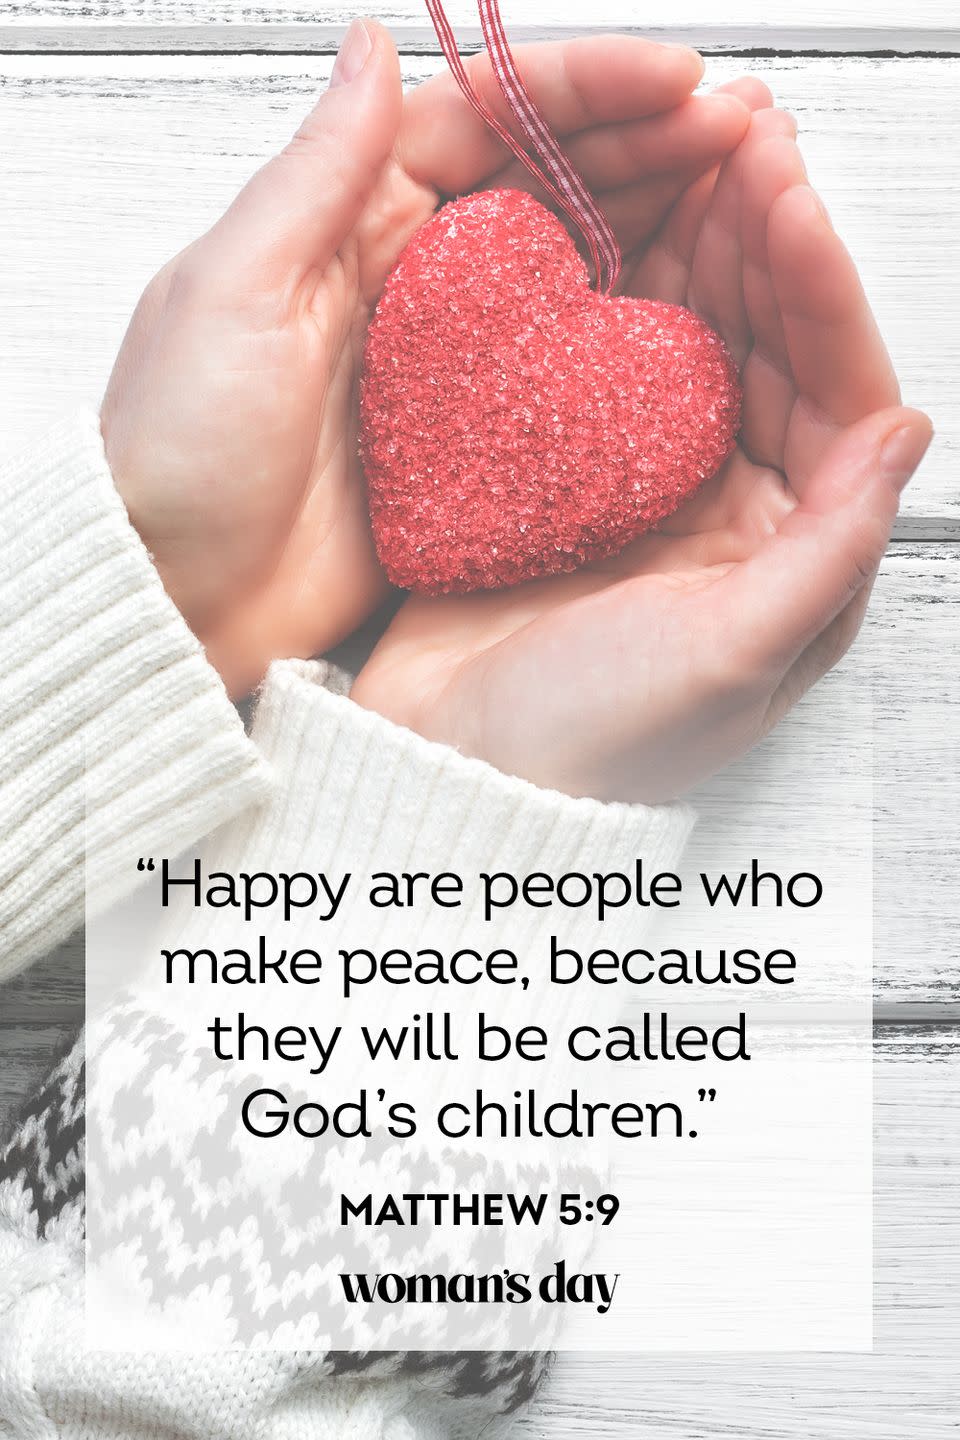 <p>“Happy are people who make peace, because they will be called God’s children.”</p><p><strong>The Good News</strong>: You have the ability to live peacefully and impart peace on all those who enter your life.</p>